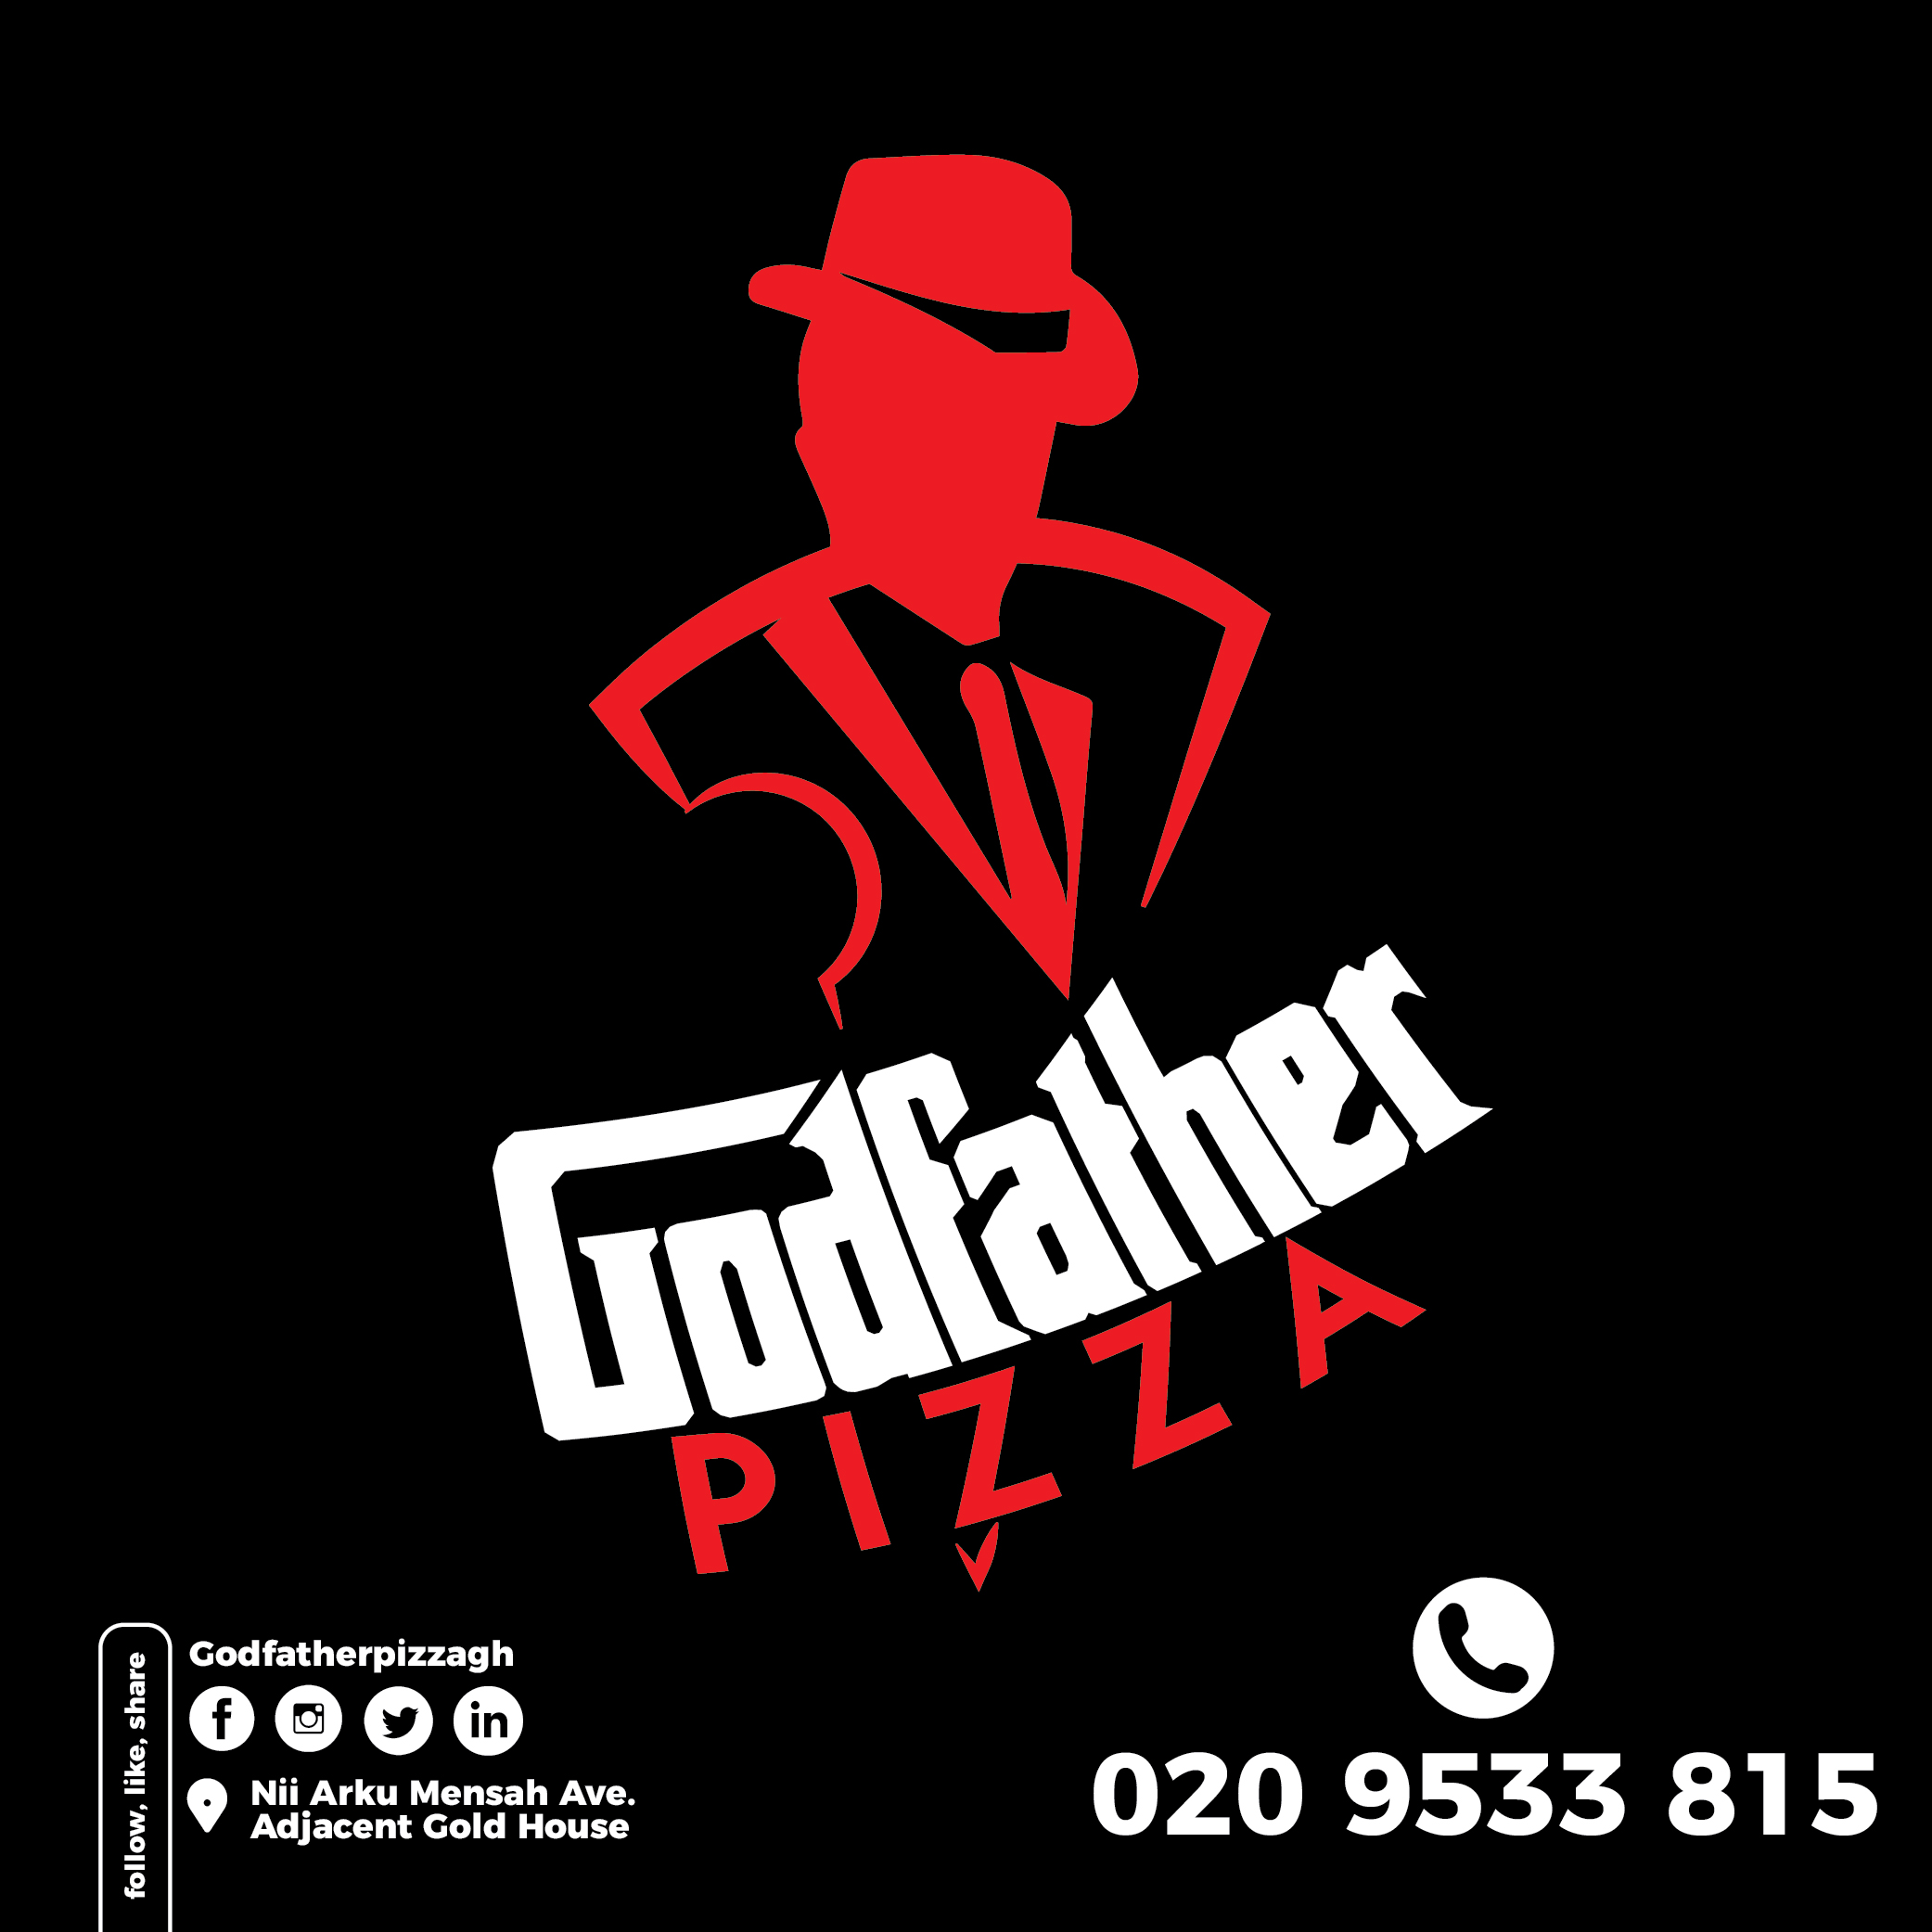 Godfather Pizza serves up some tasty packages